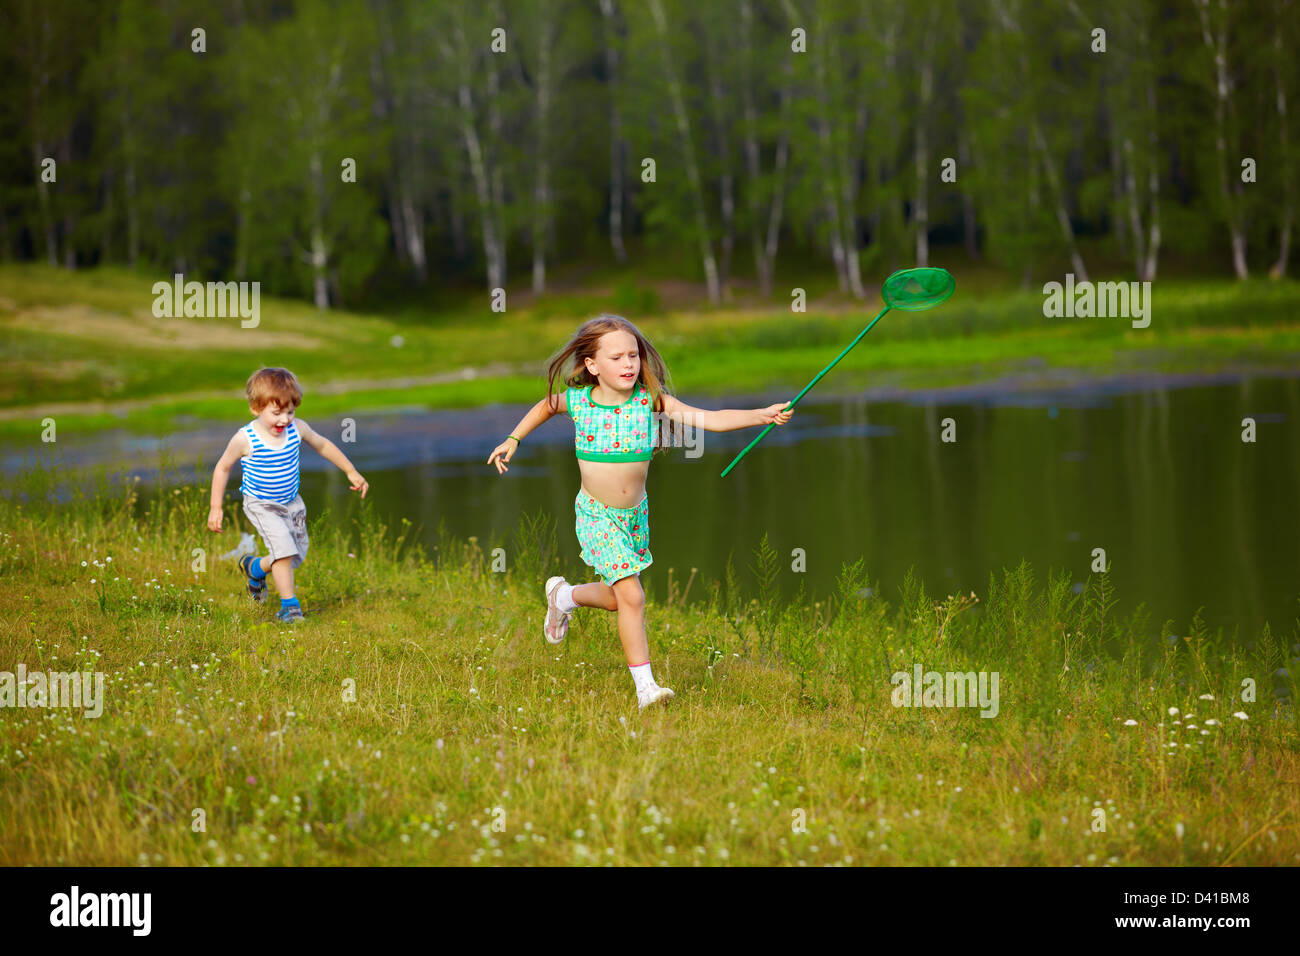 outdoor portrait of little kids running with butterfly net along the bank of the pond Stock Photo